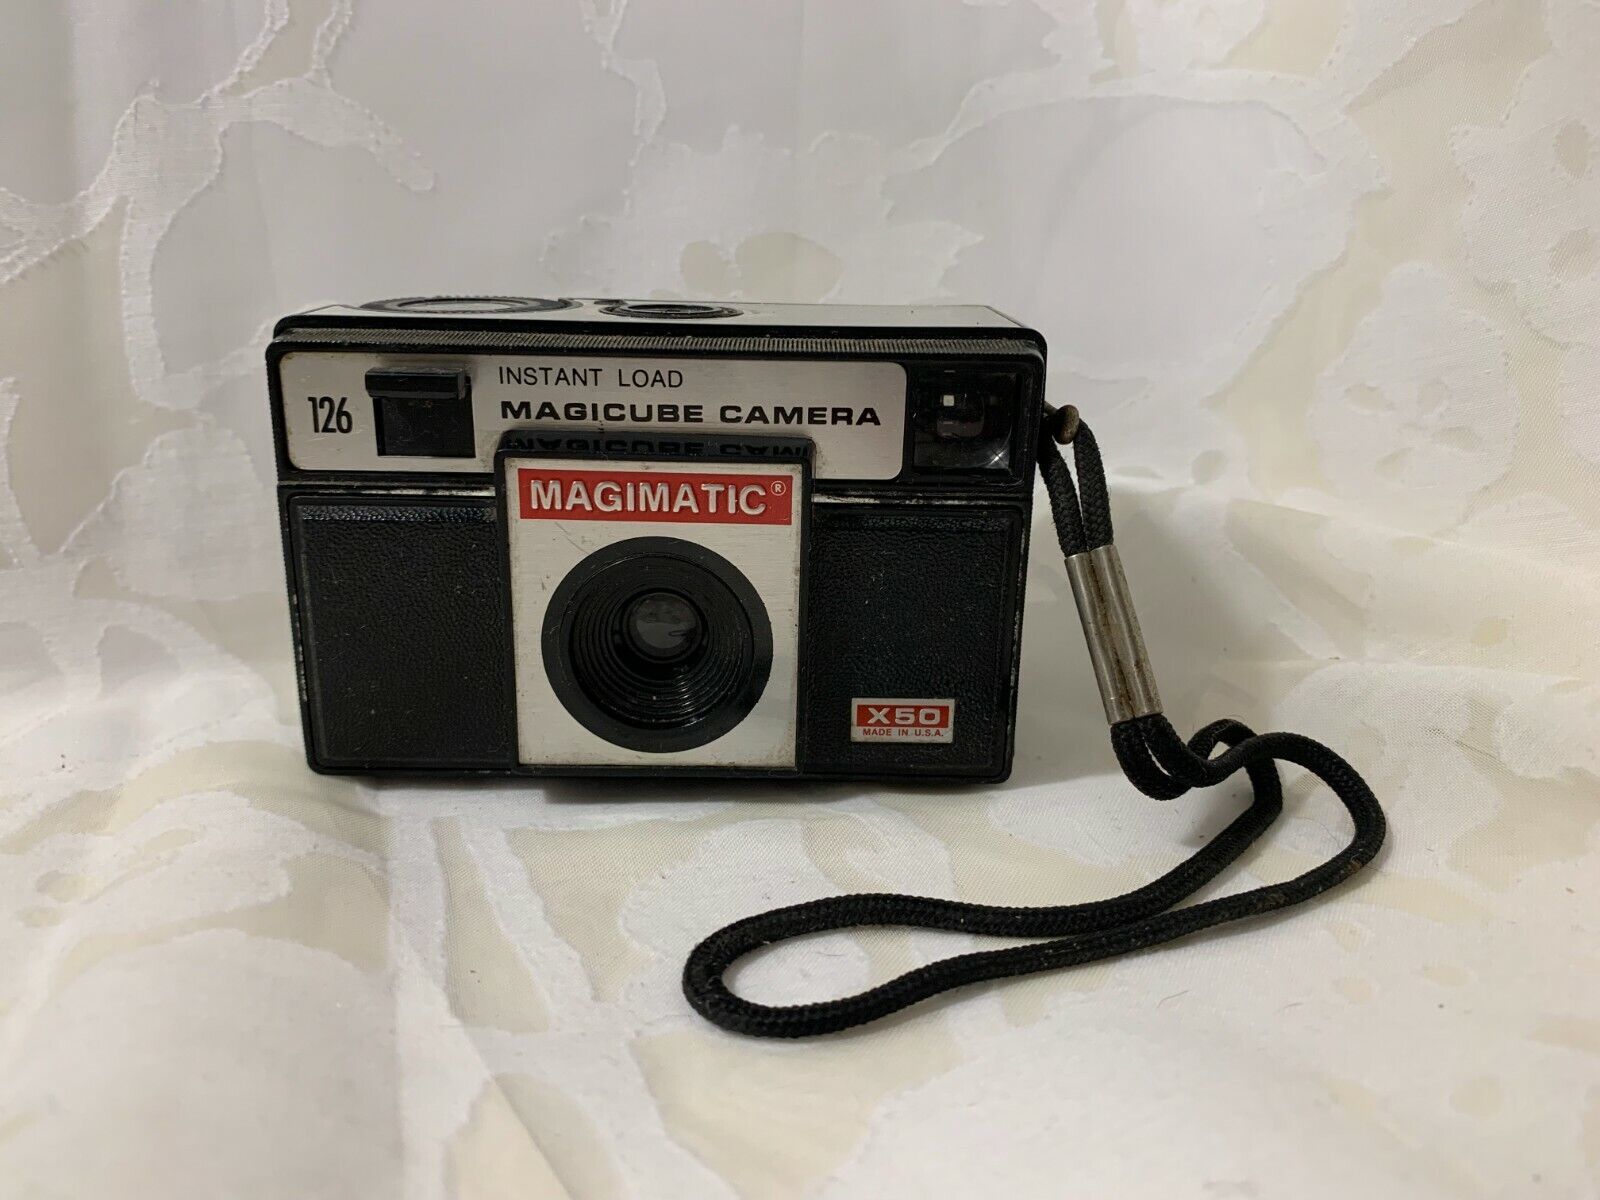 Vintage 126 Instant Load Magicube Camera X50 Made in USA Imperial Camera Corp. - $12.69